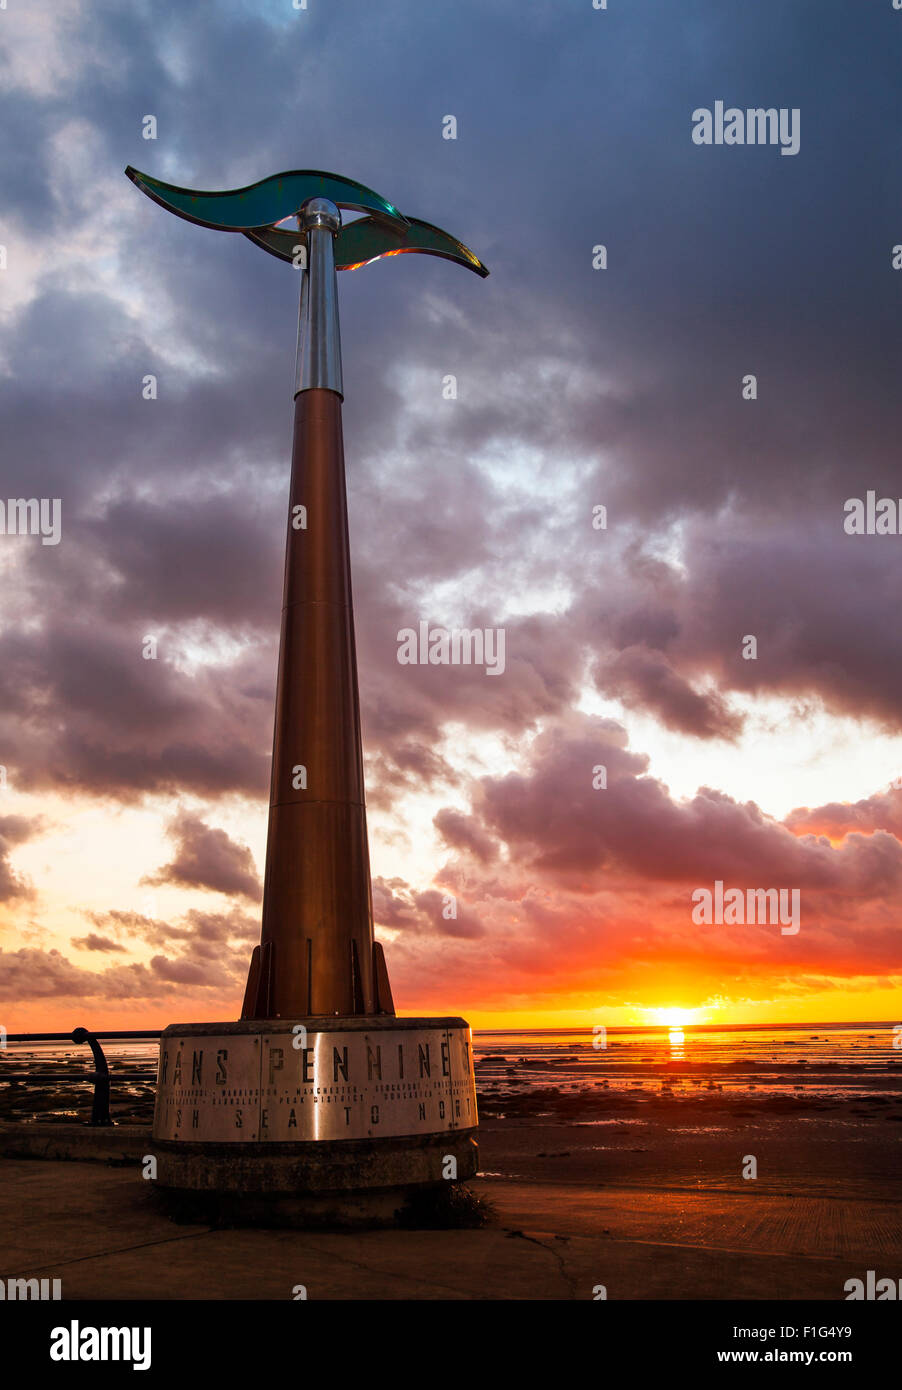 Rotating tall spinning weathervane Southport, Seafront & Promenade attractions. Colourful sunset over the Irish Sea on the north west coast of Sefton.  UK Weather wind vane, wind speed and direction instrument;   This device is a TPT Seamark on Southport’s Promenade, a  tall towering outdoor weather station wind spinner, which serves as a marker for the start of the east-west trail of The Trans Pennine coast-to-coast trail. Stock Photo